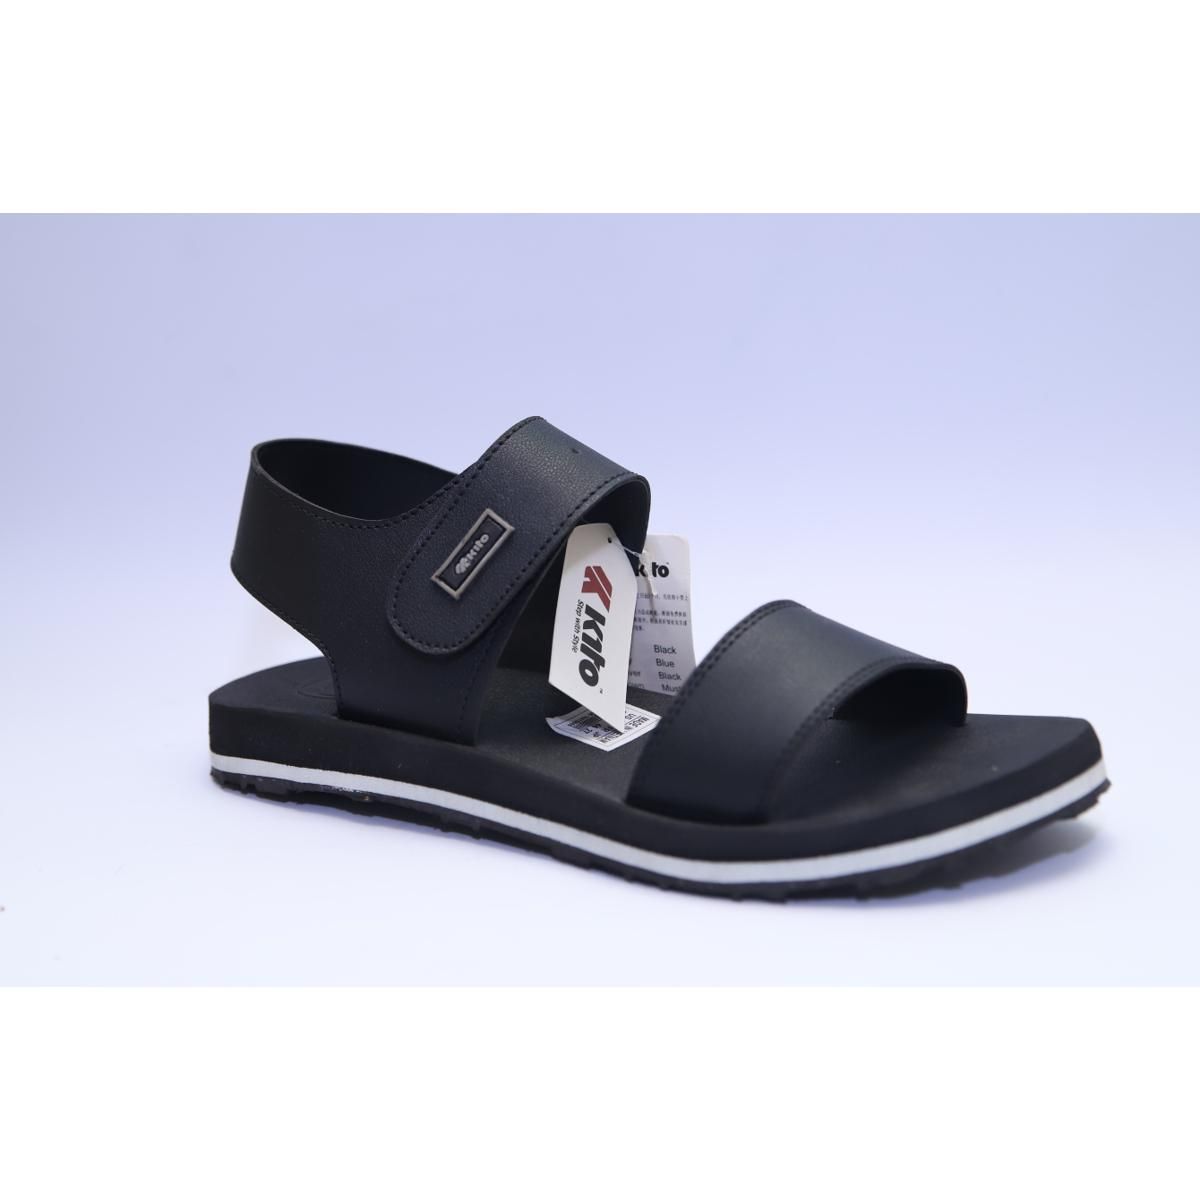 Stylish Men Ultra Soft Kito Sandals In Black Color For Summer Use Latest Design  16443 943 